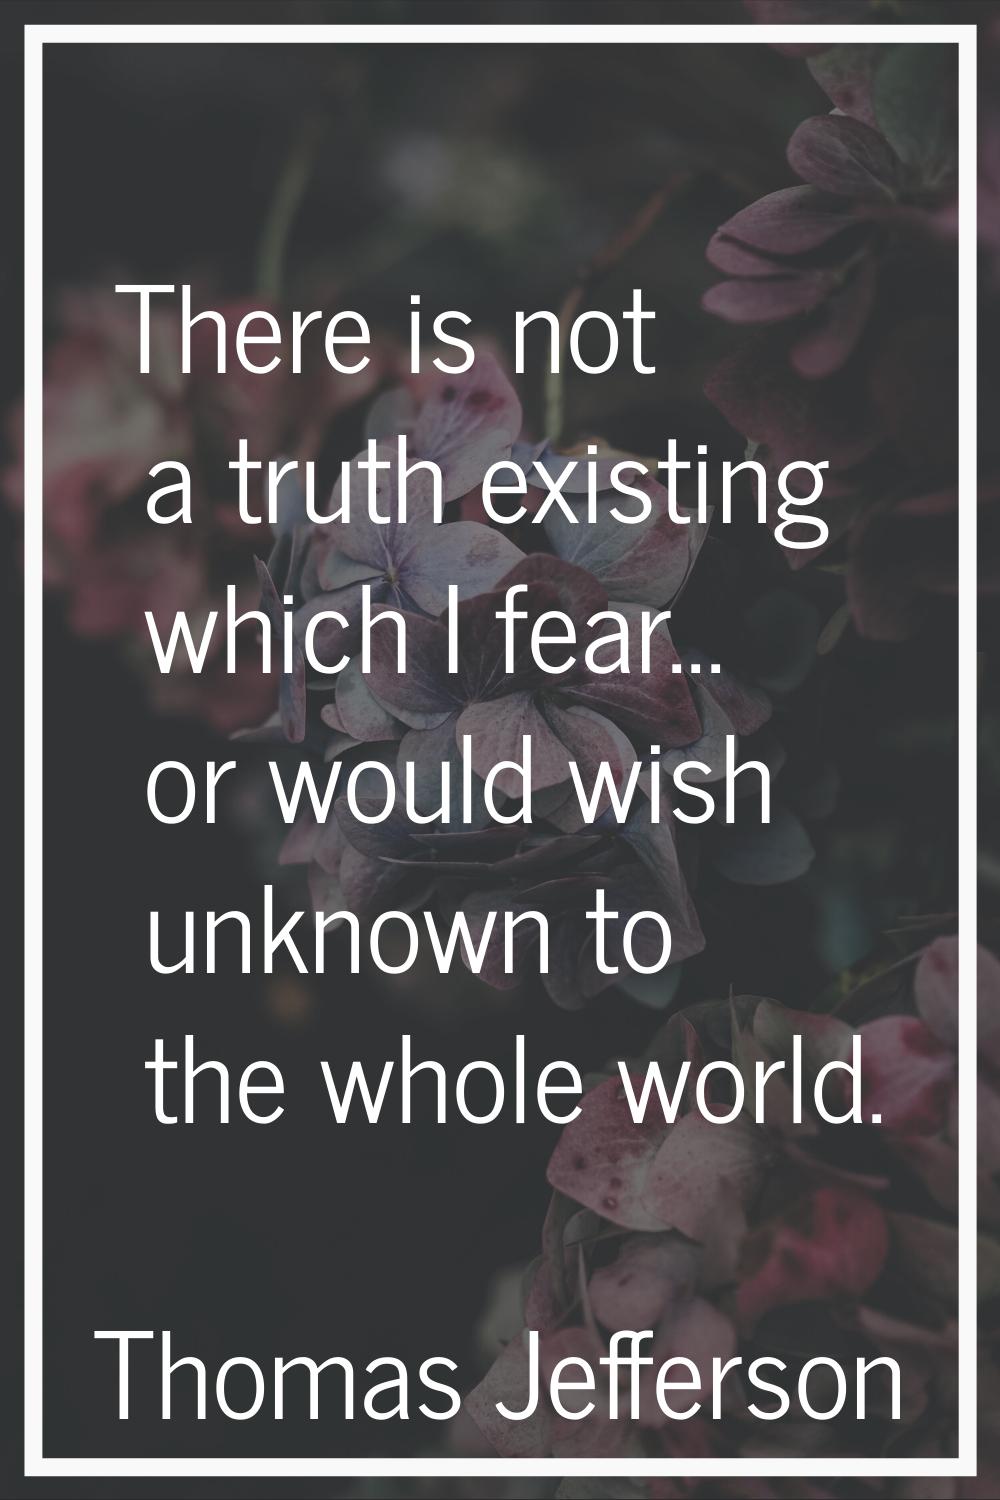 There is not a truth existing which I fear... or would wish unknown to the whole world.